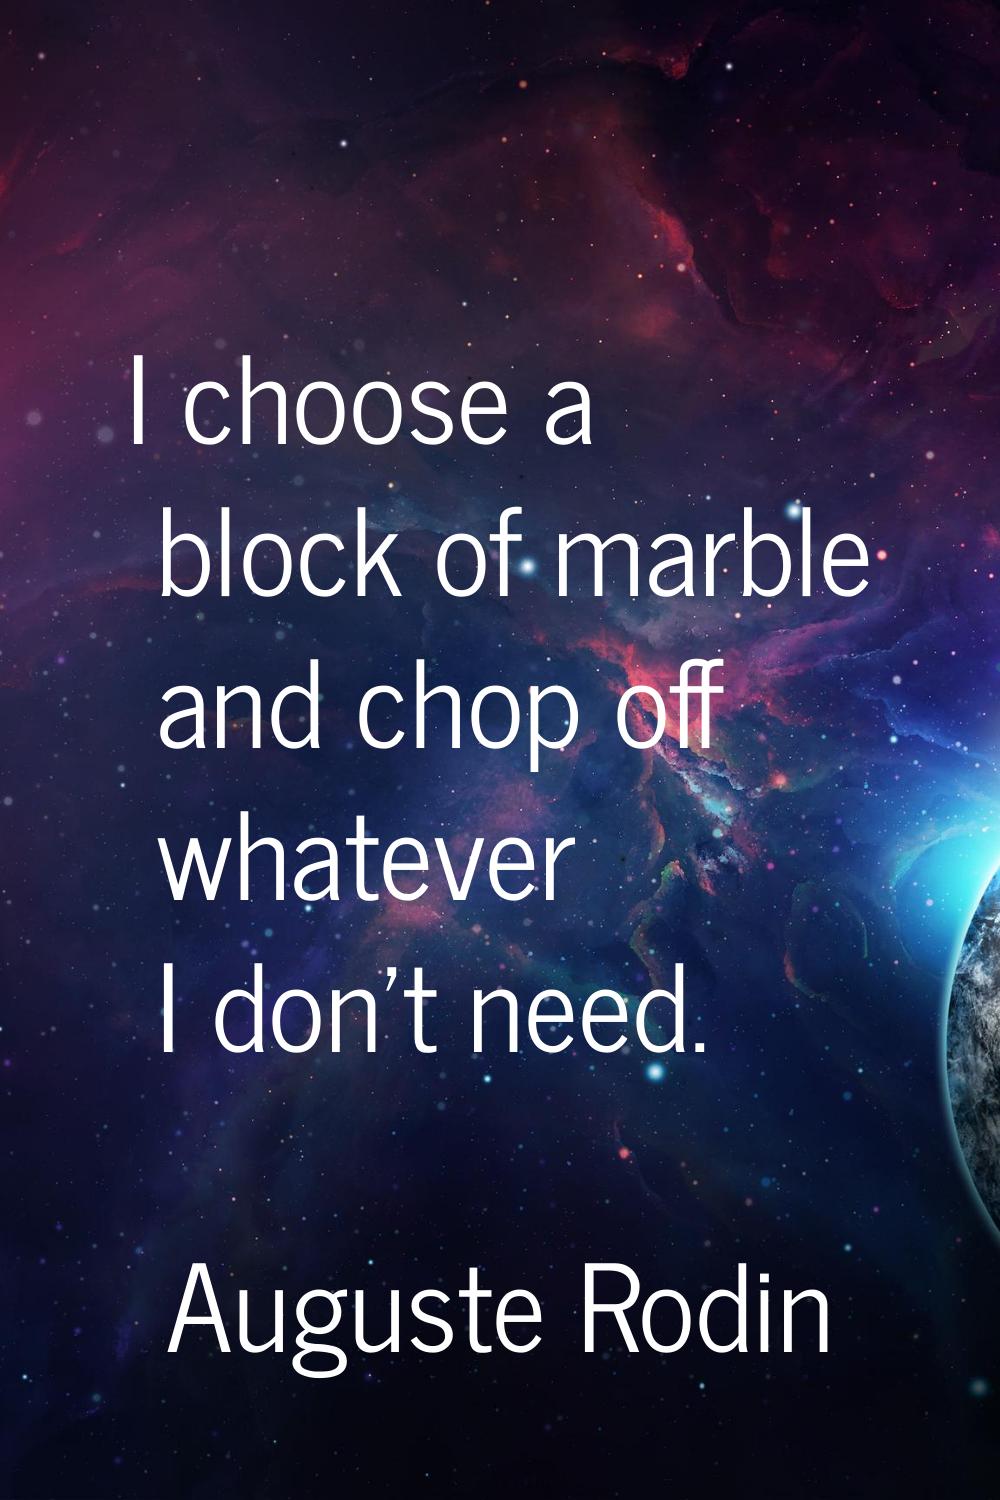 I choose a block of marble and chop off whatever I don't need.